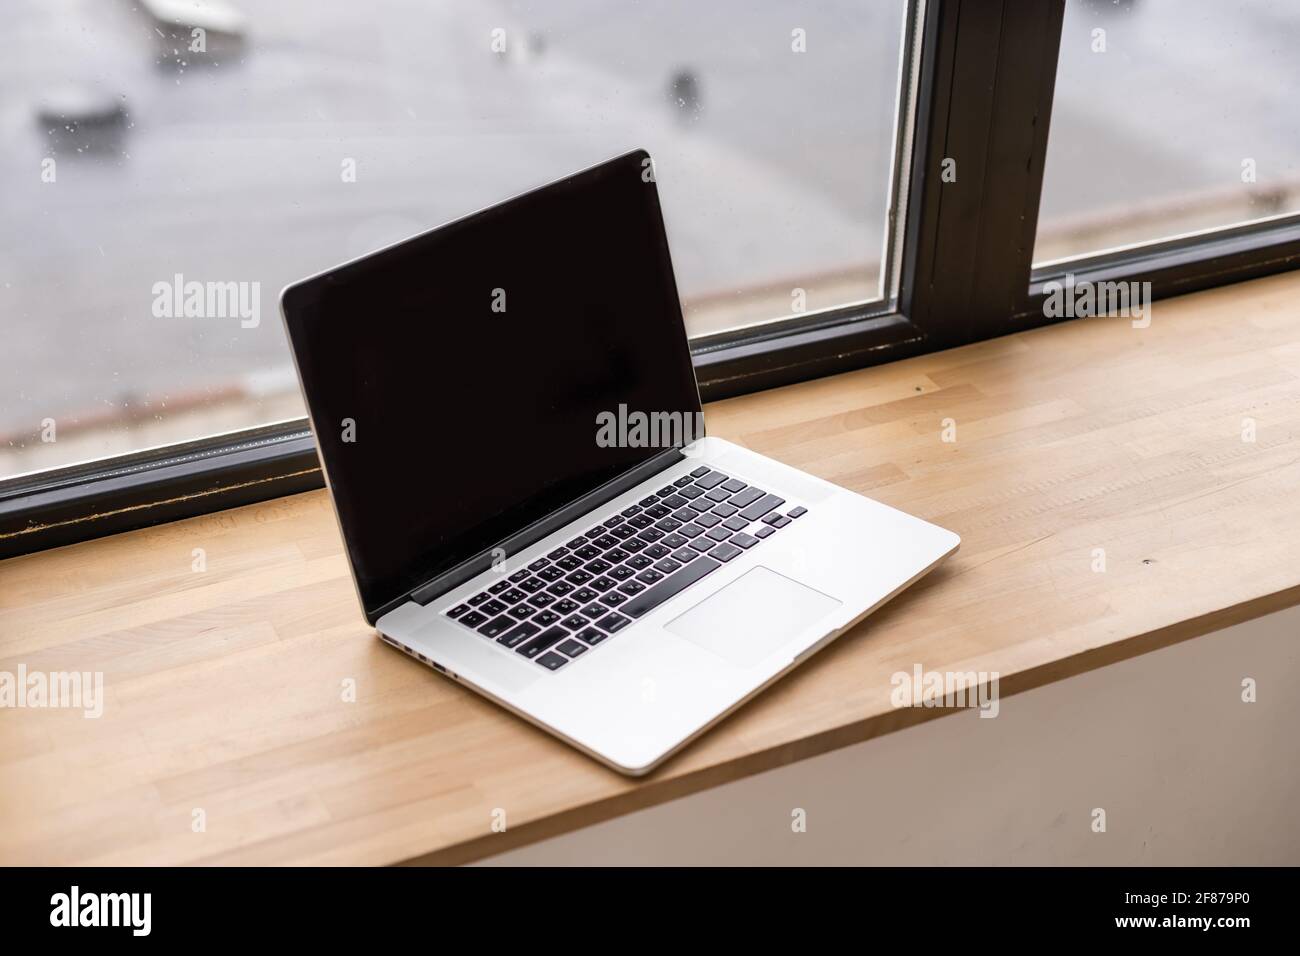 Laptop with blank screen on table Stock Photo